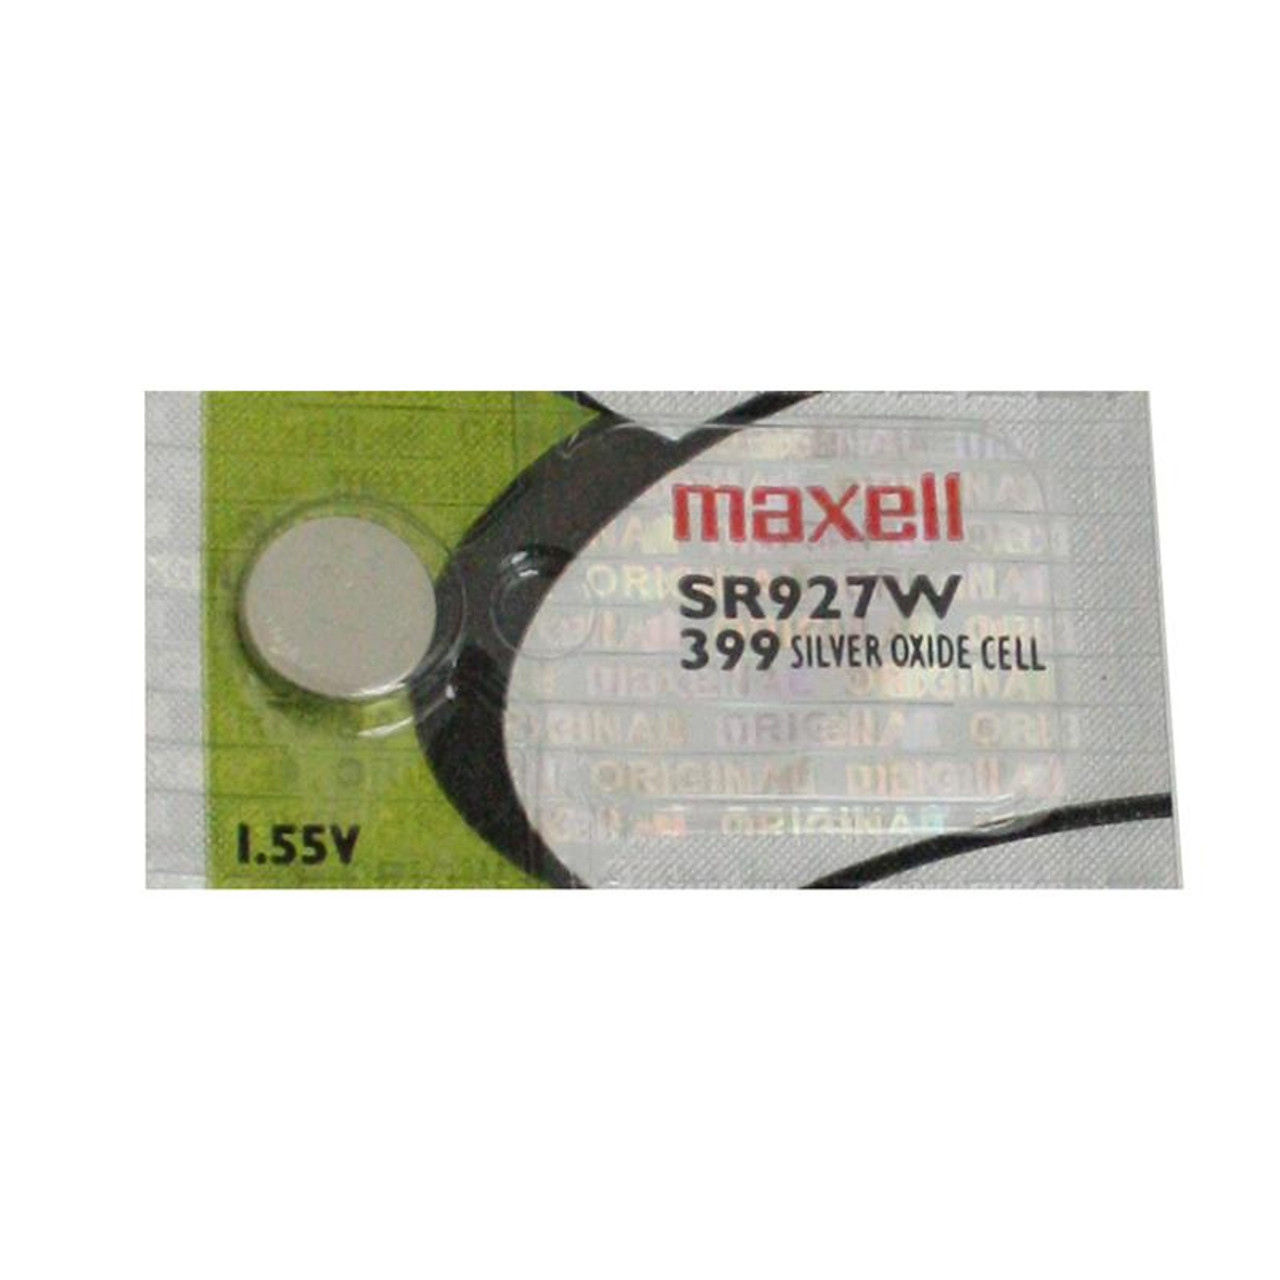 Maxell SR927W Replacement Watch Battery